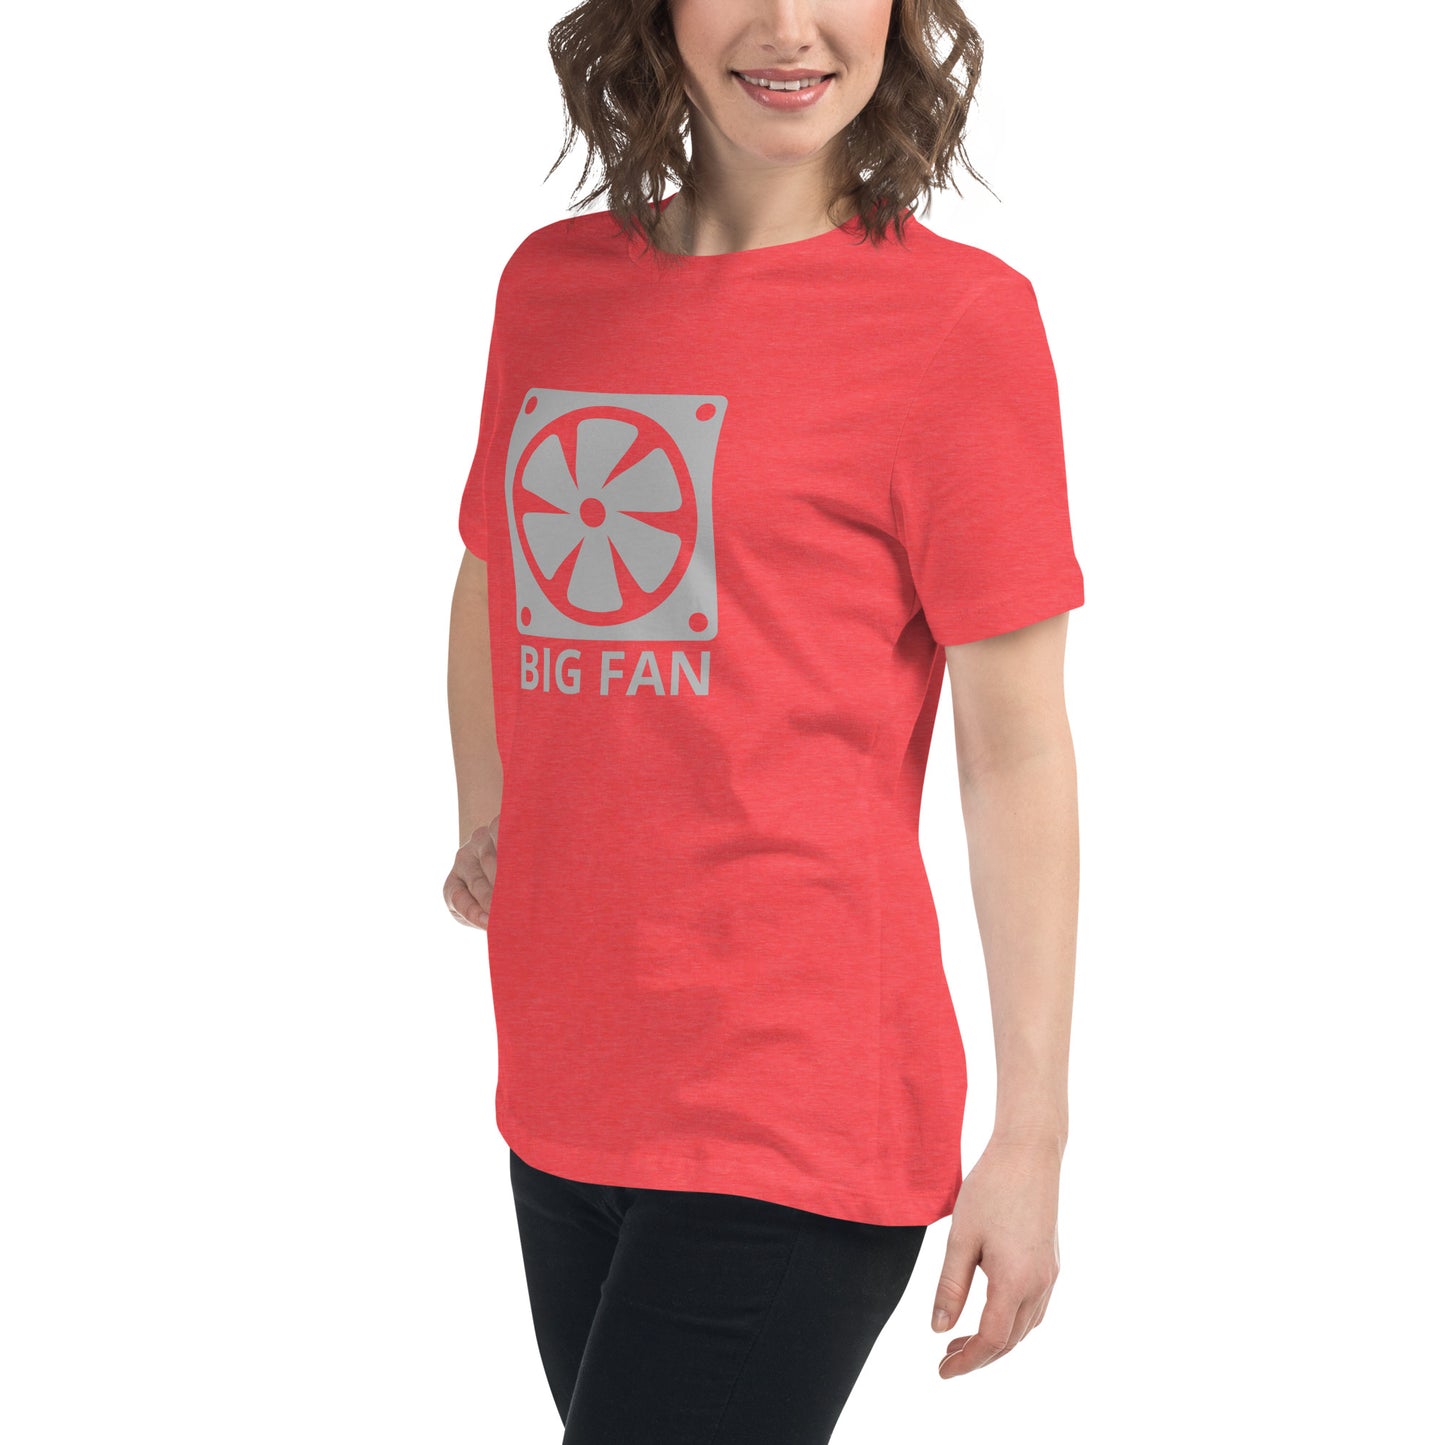 Women with red t-shirt with image of a big computer fan and the text "BIG FAN"